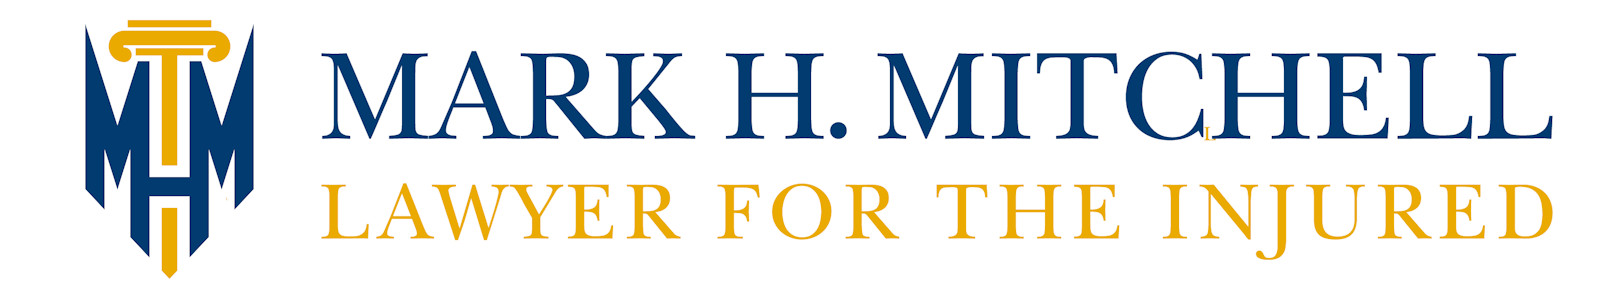 Mark H. Mitchell Law Office